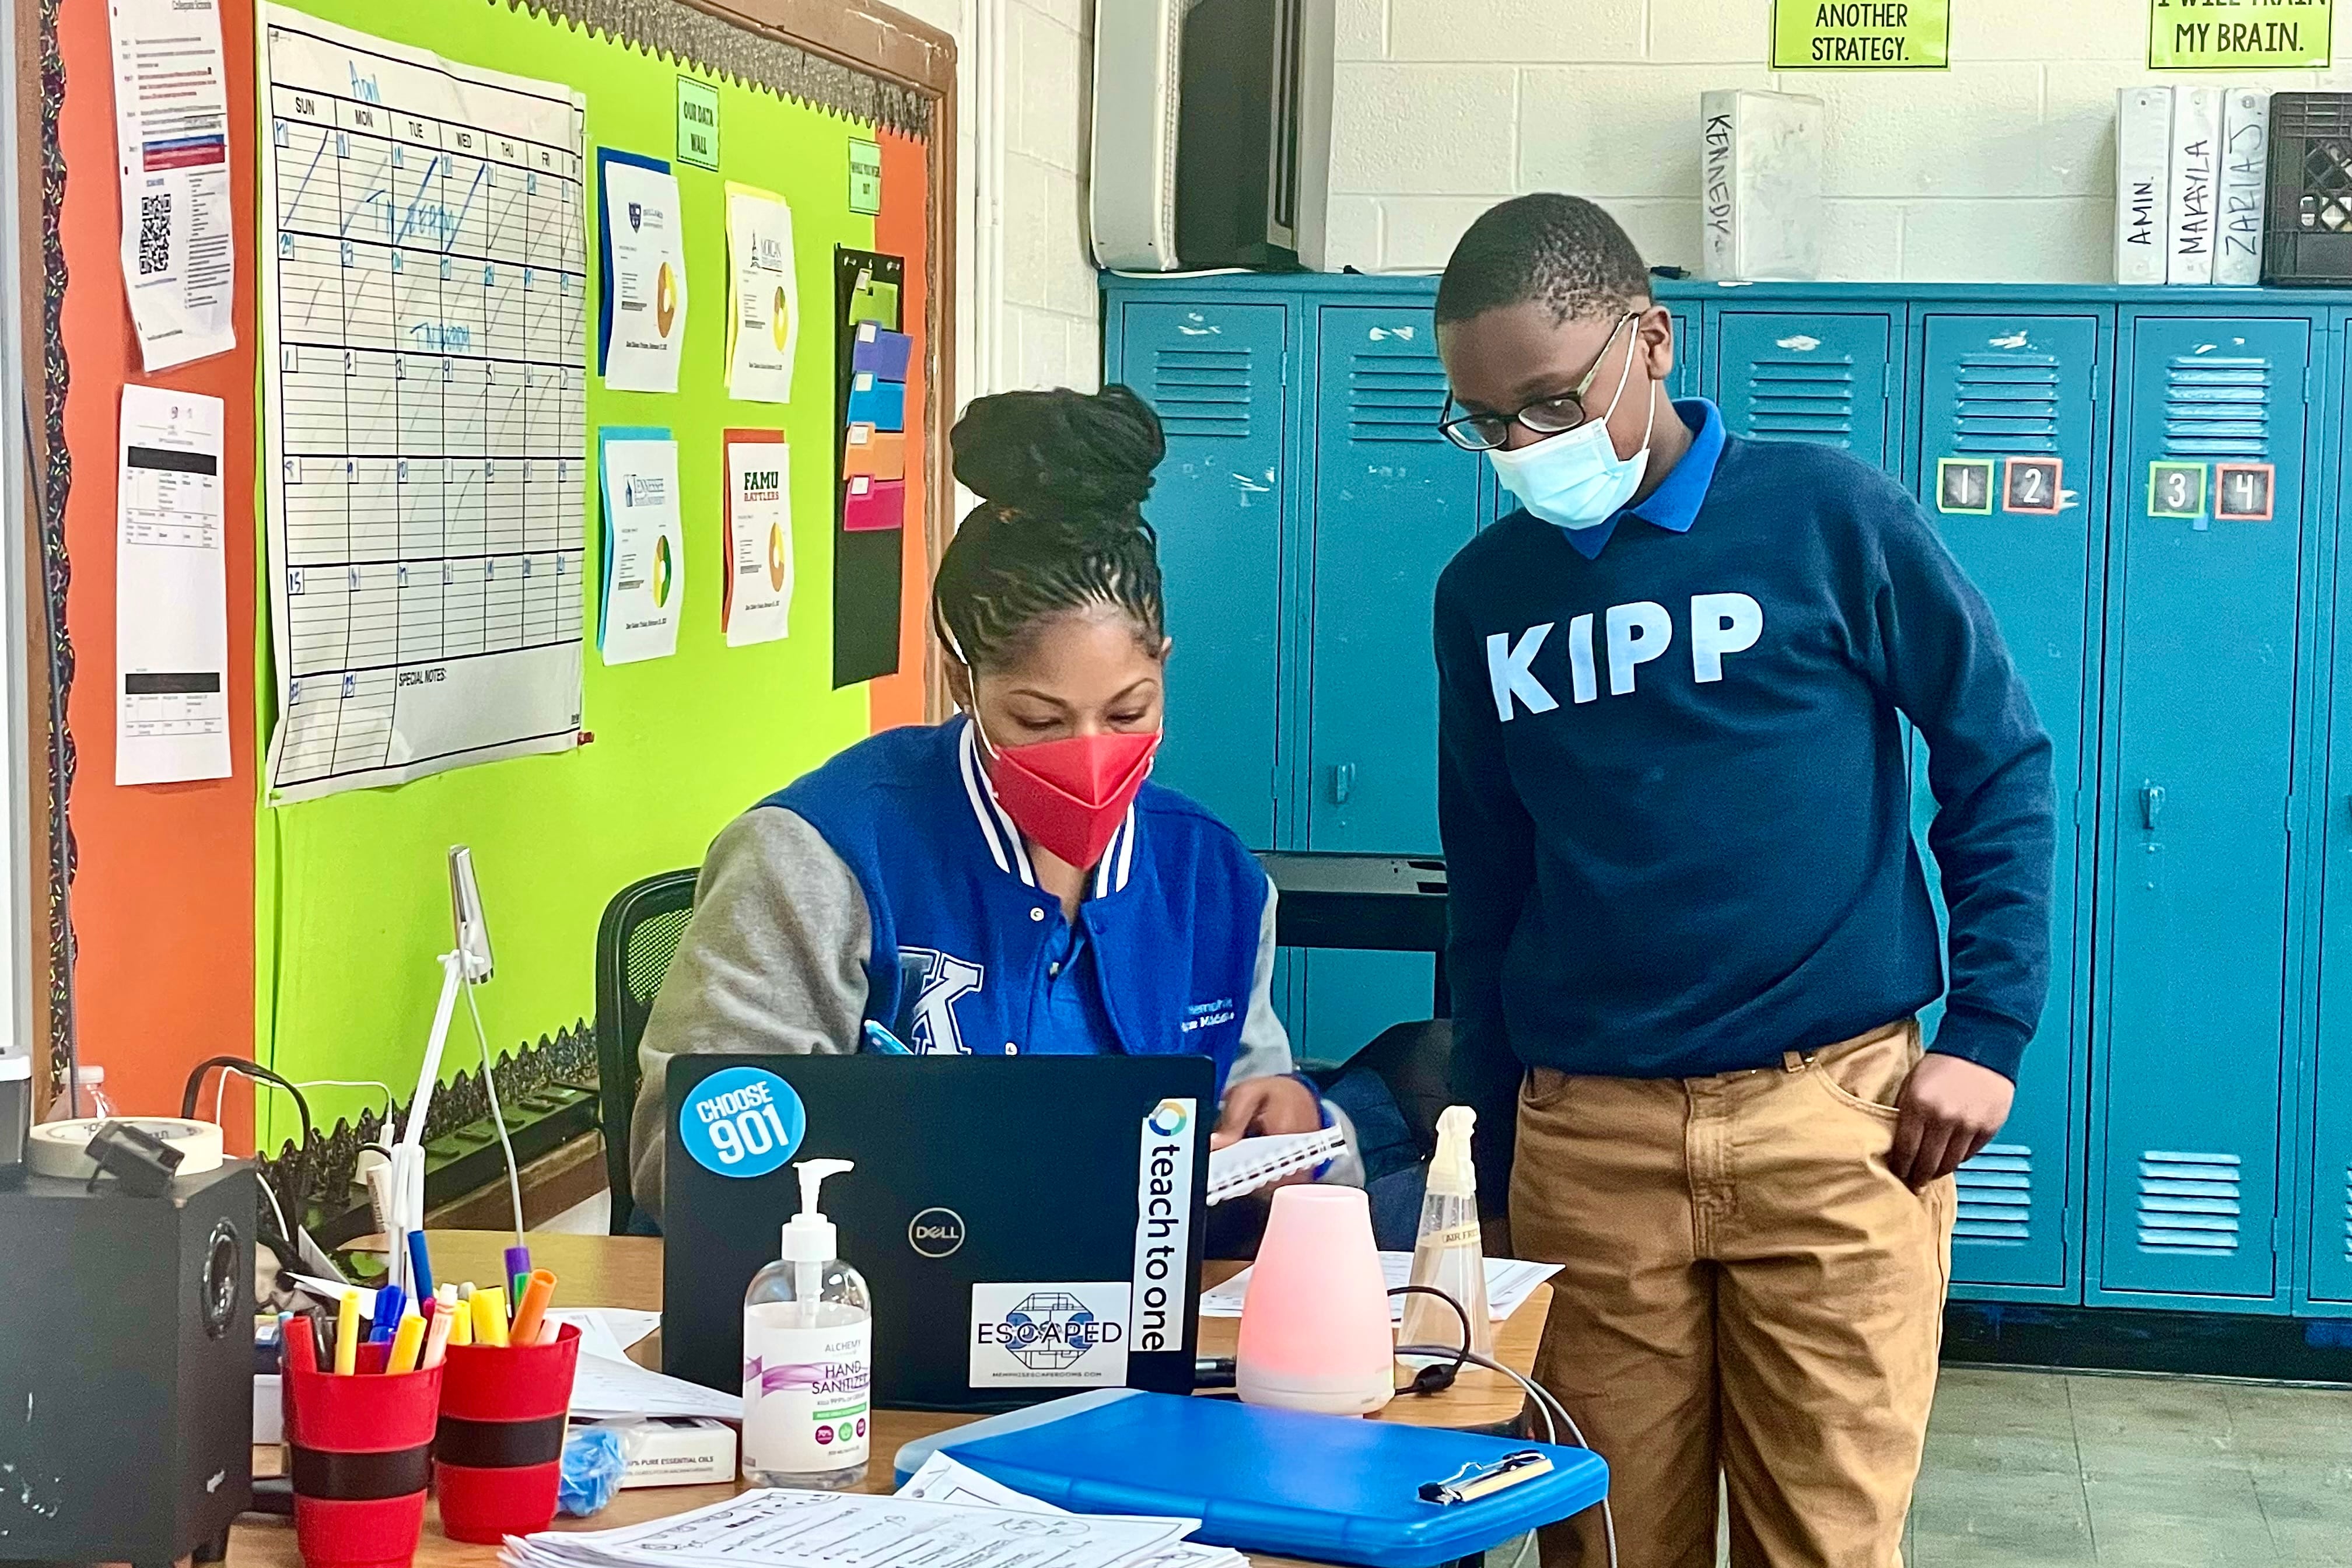 A female KIPP Memphis teacher answers a boy’s question while sitting at her desk in front of her laptop. Both are wearing masks; the teacher is wearing a bright blue and grey KIPP letter jacket, while the boy is wearing a navy sweatshirt with “KIPP” in brighter blue lettering.